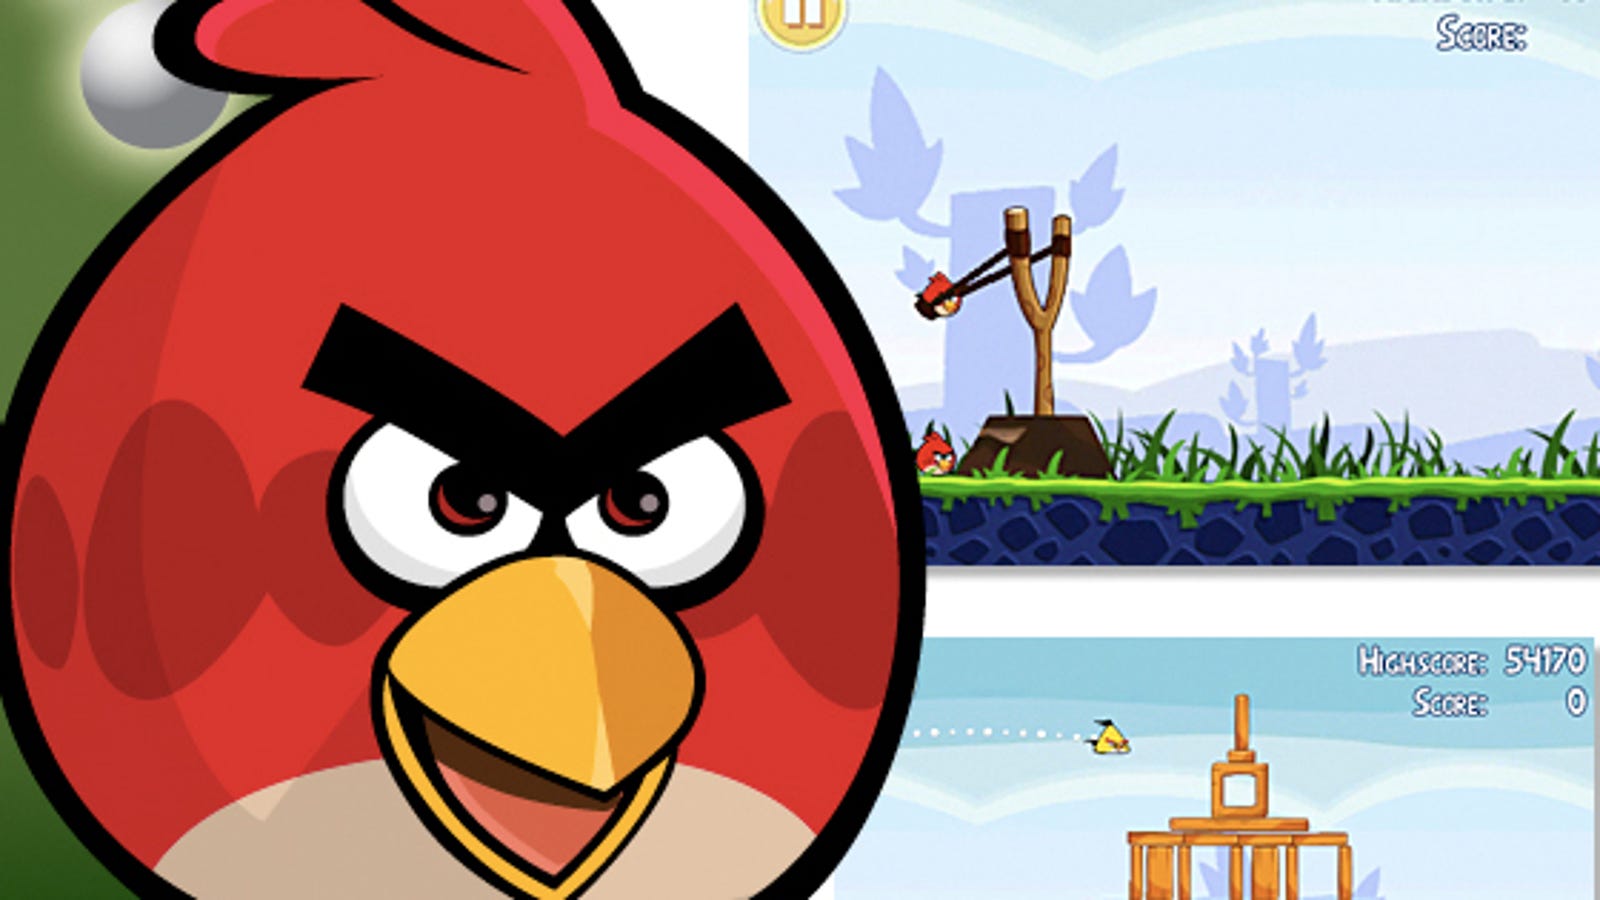 Full Angry Birds Game Now Available on Android for Free